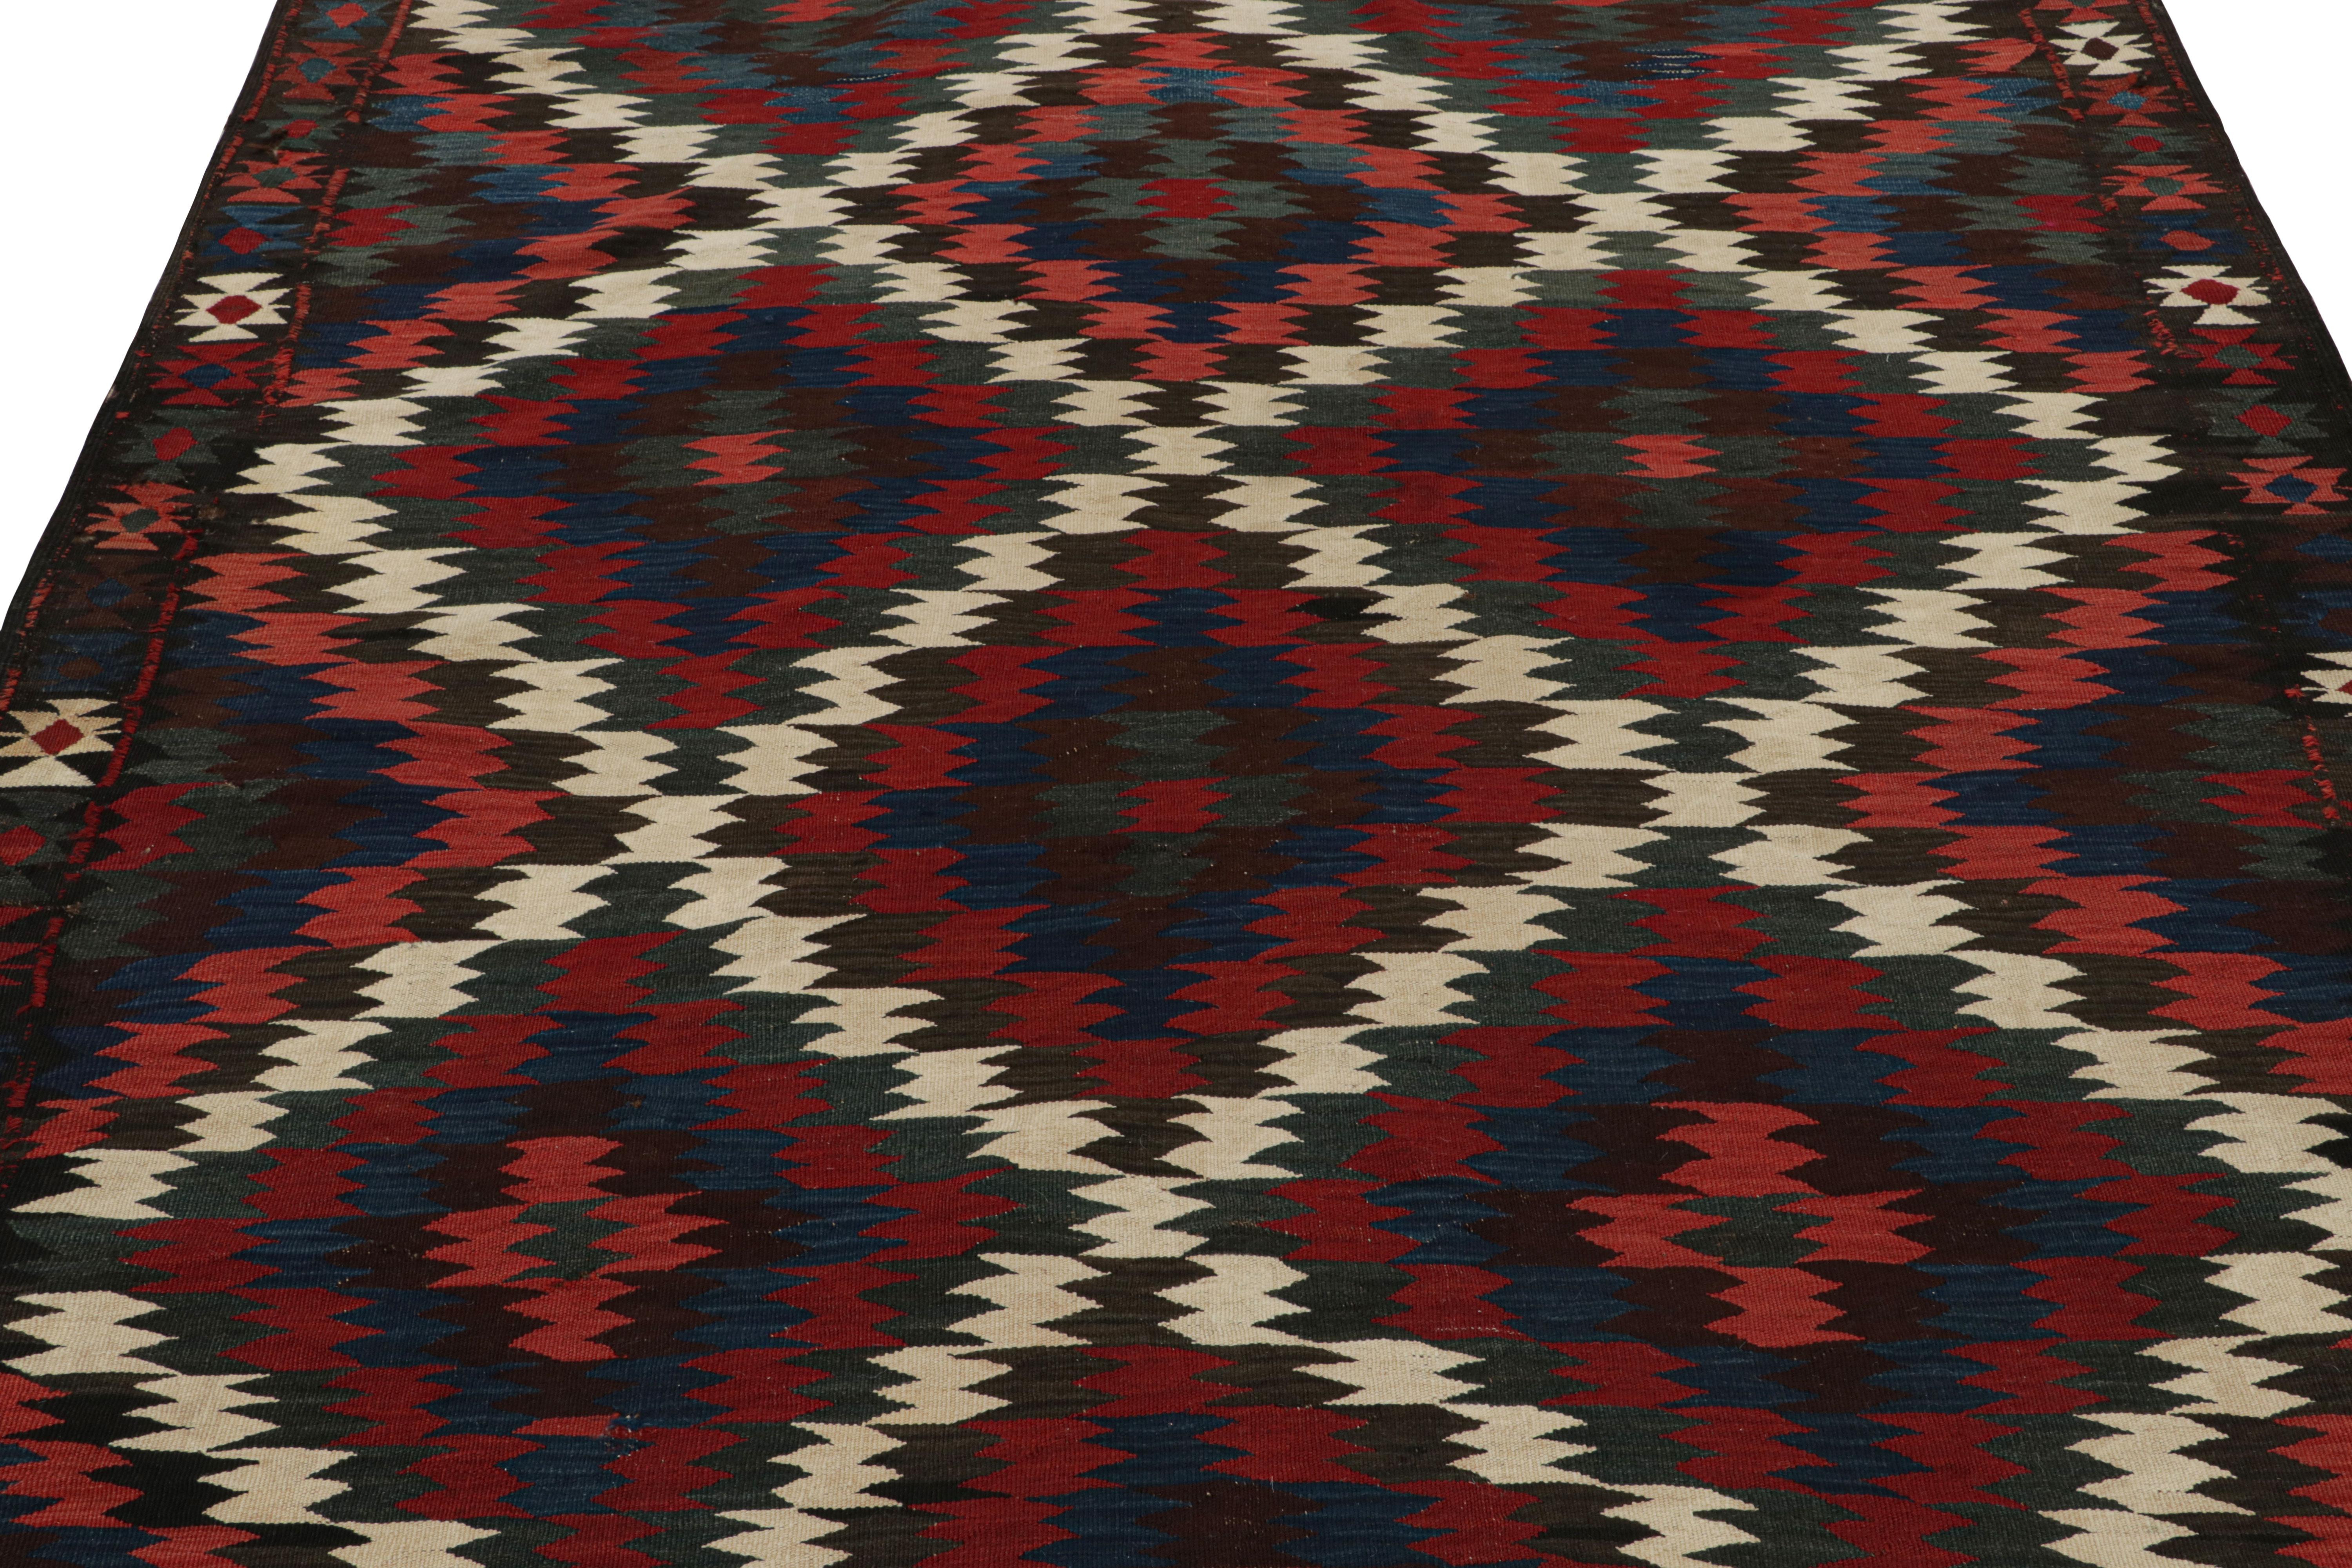 Hand-Knotted Vintage Kilim with Red, Teal and Blue Geometric Patterns, from Rug & Kilim  For Sale